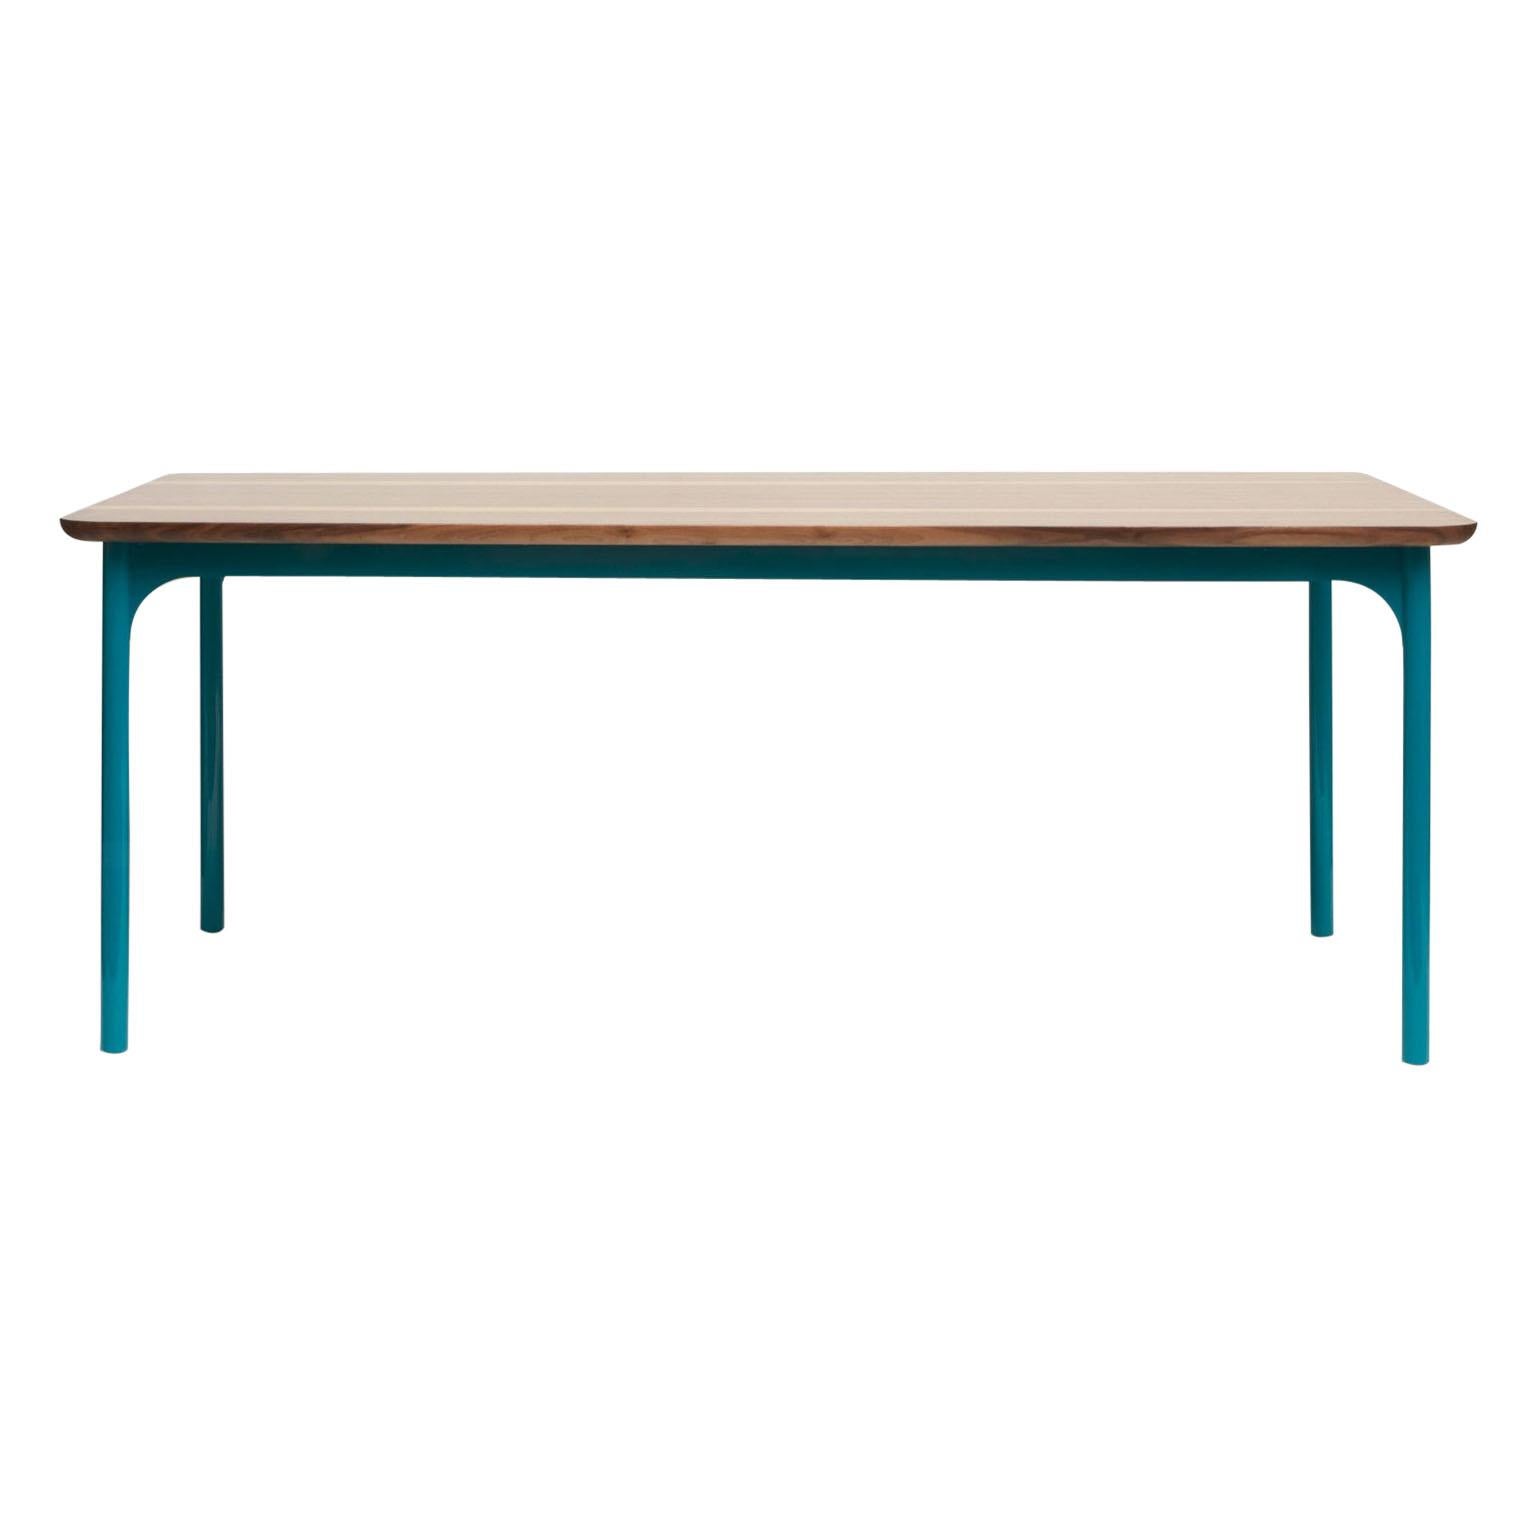 21st Century Matteo Zorzenoni Dining Table Metal Structure Wood Fillet S Scapin